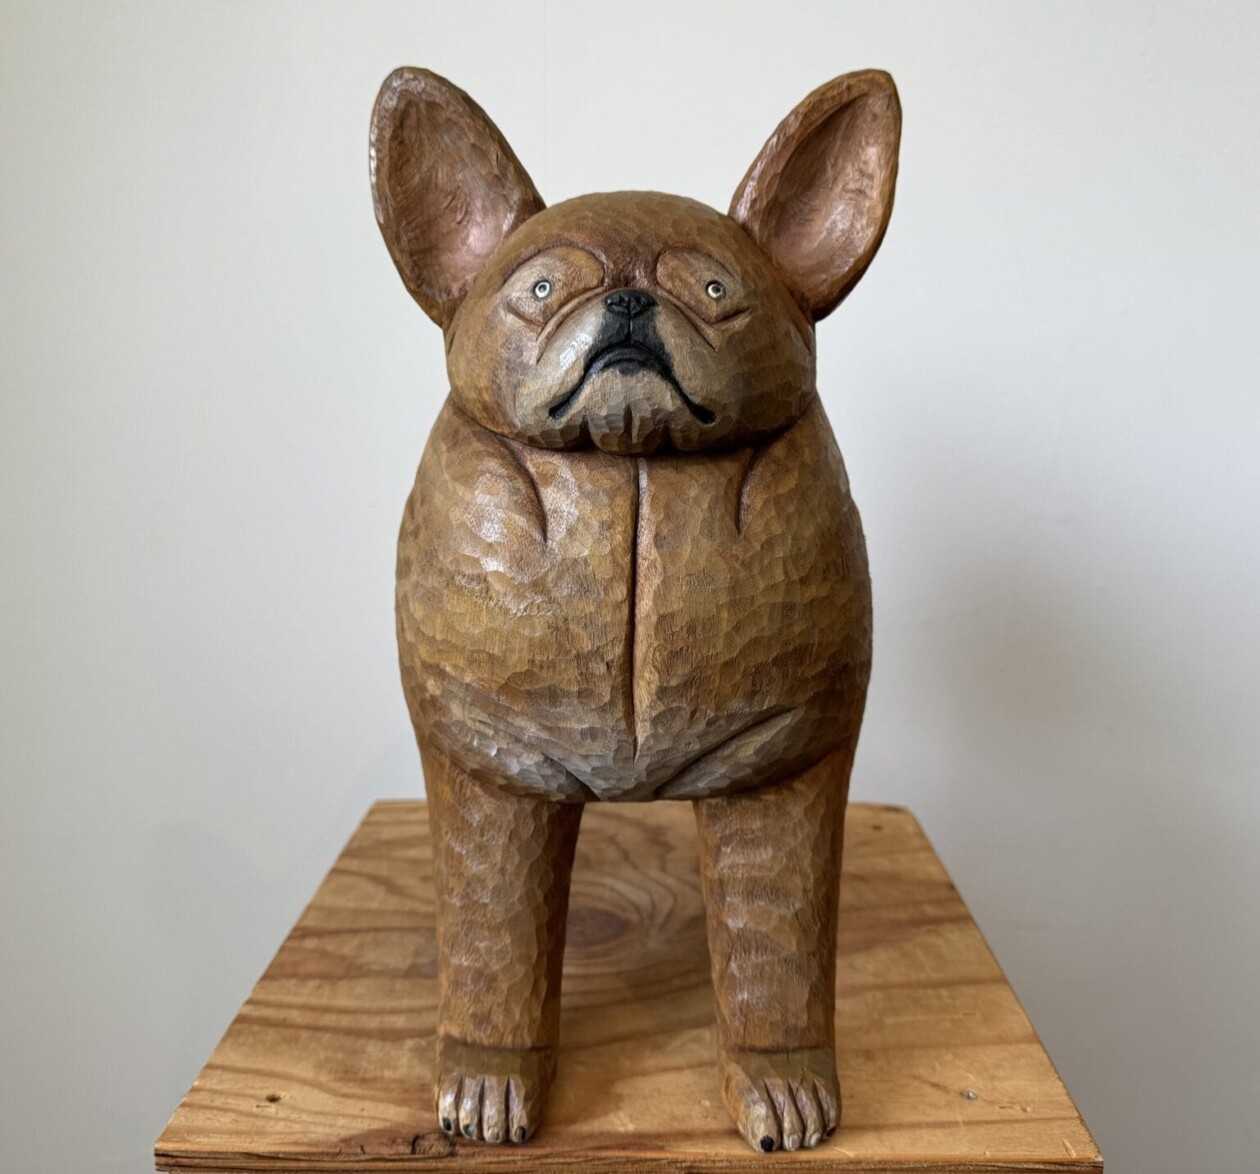 Misato Sano's Wooden Sculptures Bring Canine Companions To Life (9)